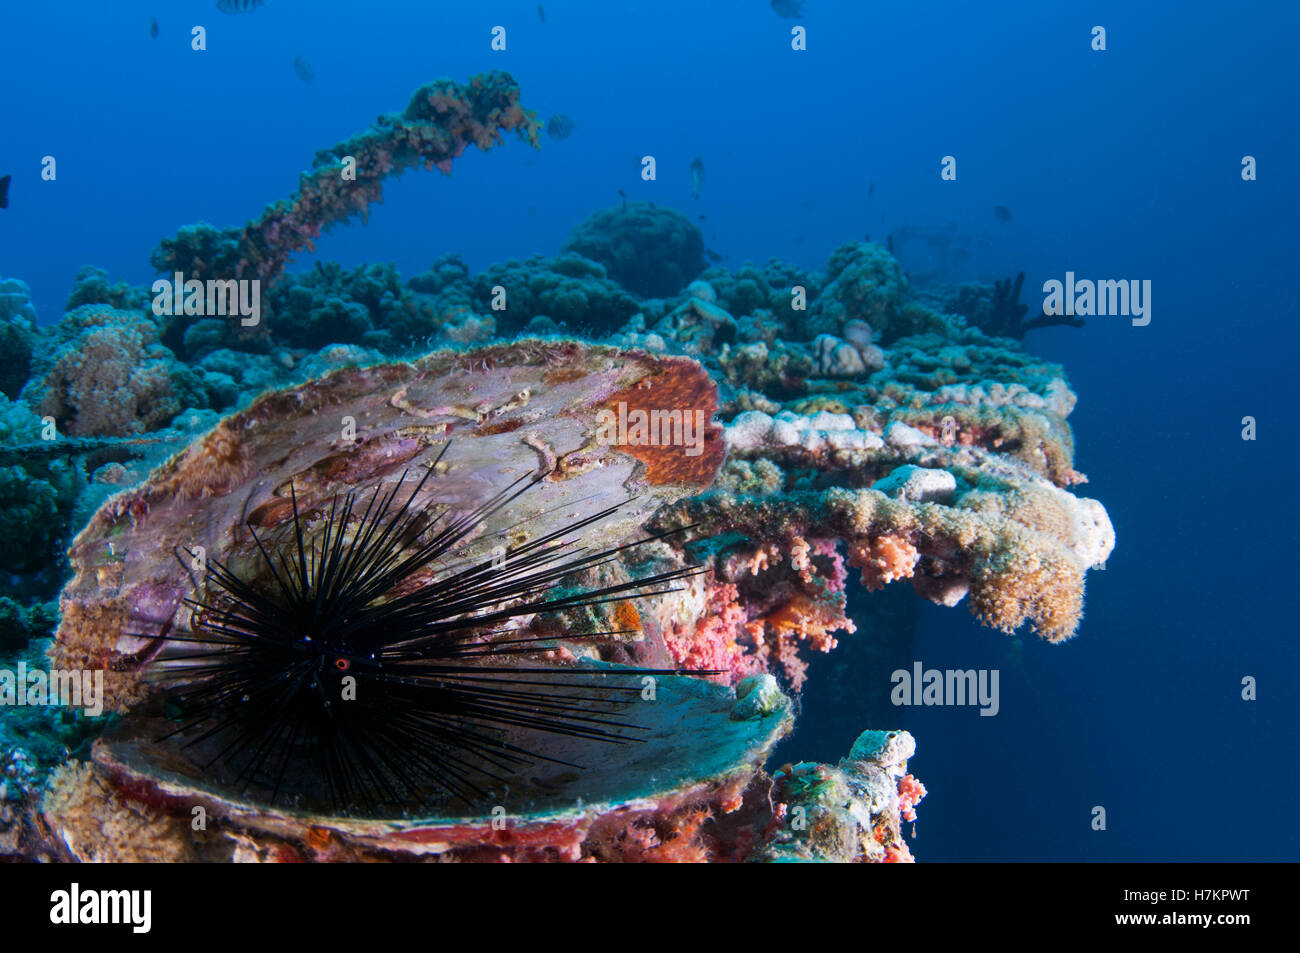 Black Sea urchin (Echinoidea) hides within a clam shell. Photographed the Red Sea, Eilat, Israel Stock Photo